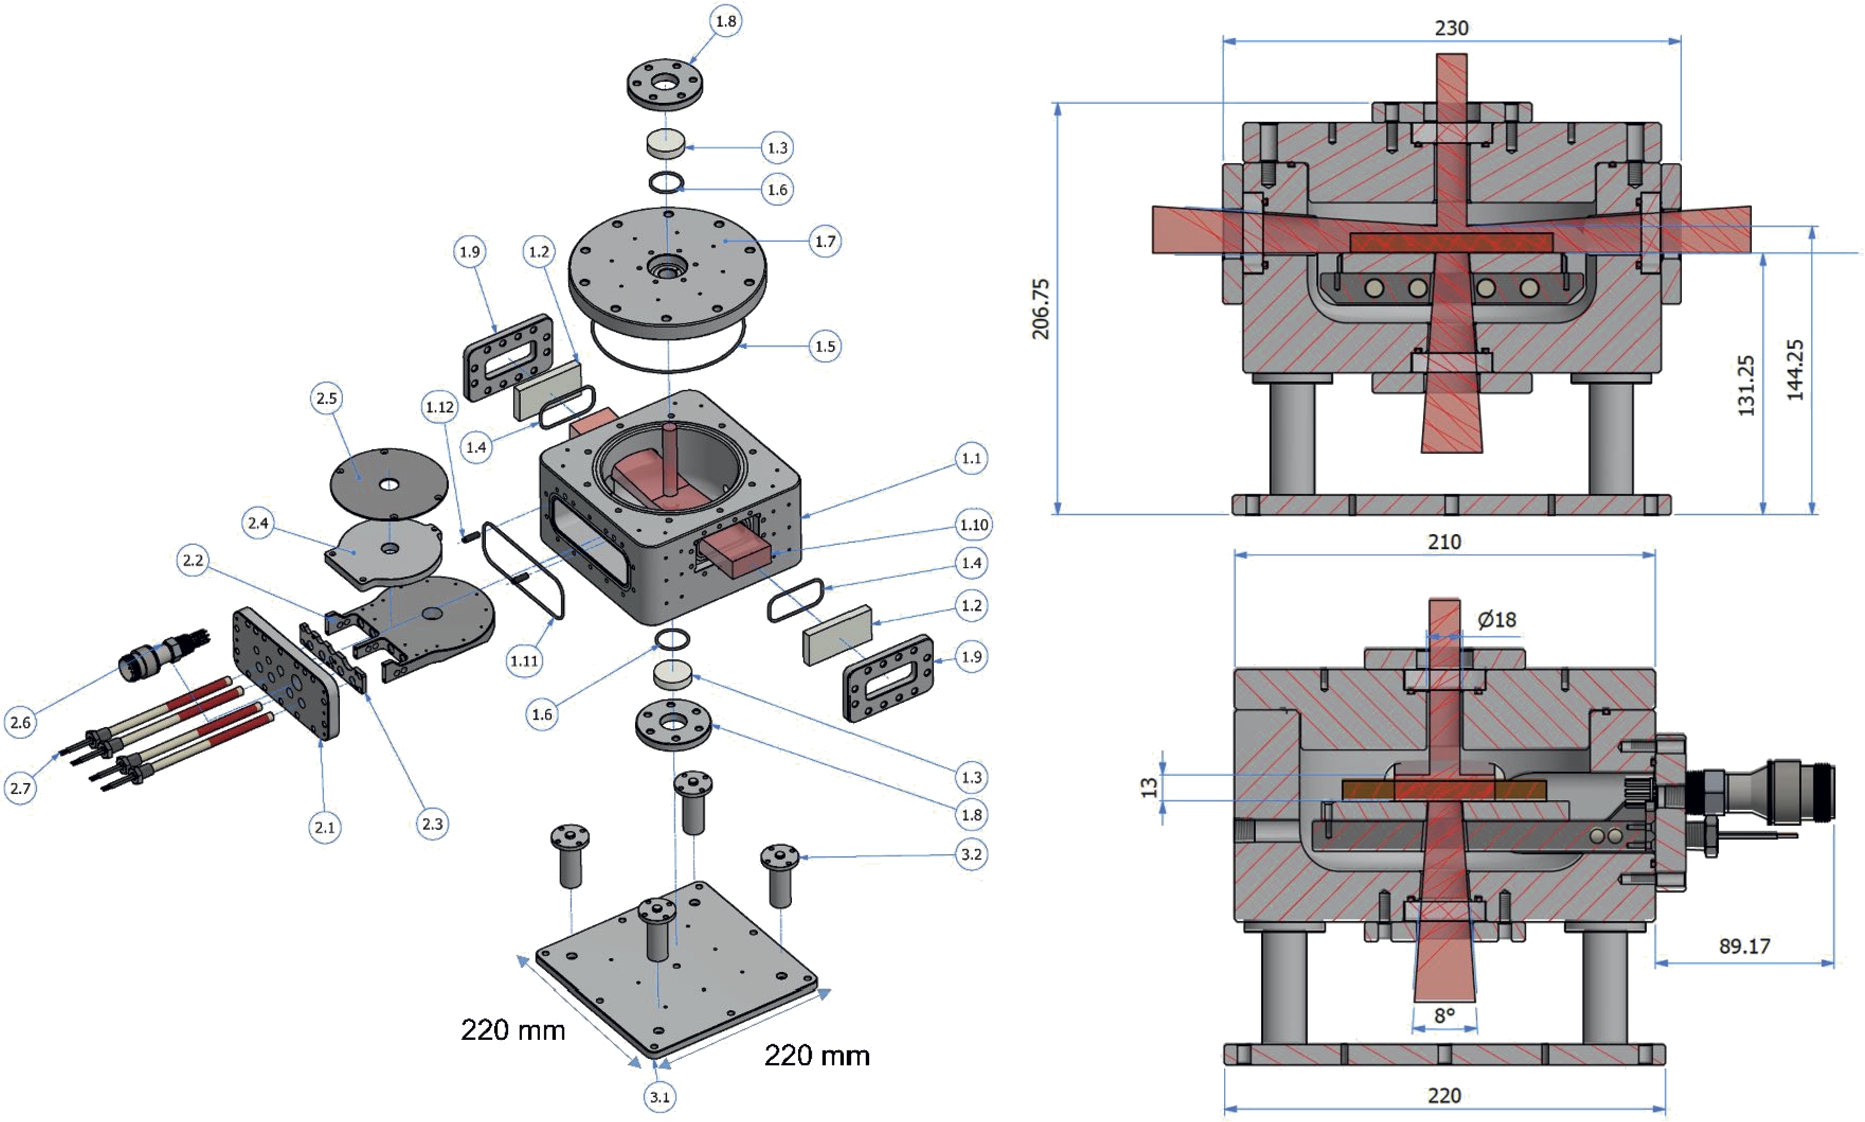 (left) Exploded view of the pressure and temperature controlled cell. (right) Schematics of the cell in NR and SANS mode in which the beam is illustrated. The cell consists of three main components: (1) the cell body including the lid, the (2) insert and the base plate (3.1) with cylindrical posts (3.2). Unless stated otherwise, the components are made from aluminum. The cell body consists of (1.1) main body, (1.2) quartz windows for reflectometry, (1.3) quartz windows for SANS, (1.4) Kalrez O-Ring 55.25 × 2.62 mm2, (1.5) Kalrez O-Ring 158.42 × 2.62 mm2, (1.6) Kalrez O-Ring 29.82 × 2.62 mm2, (1.7) lid, (1.8) aluminum plate to clamp the quartz windows for SANS (1.9) and reflectometry (1.10), (1.11) Kalrez O-Ring 29.82 × 2.62 mm2, (1.12) parallel pin (dowel pin). (2.1) Back plate for the insert, (2.2) stainless steel heating plate, (2.3) stainless steel holder plate, (2.4) sample support plate, (2.5) clamp for SANS samples, (2.6) multipin connector, (2.7) heating rods. The drawing is to scale and the red shading illustrates the neutron beams when the cell is used for reflectometry and SANS (1.10). The dimensions are indicated in mm.